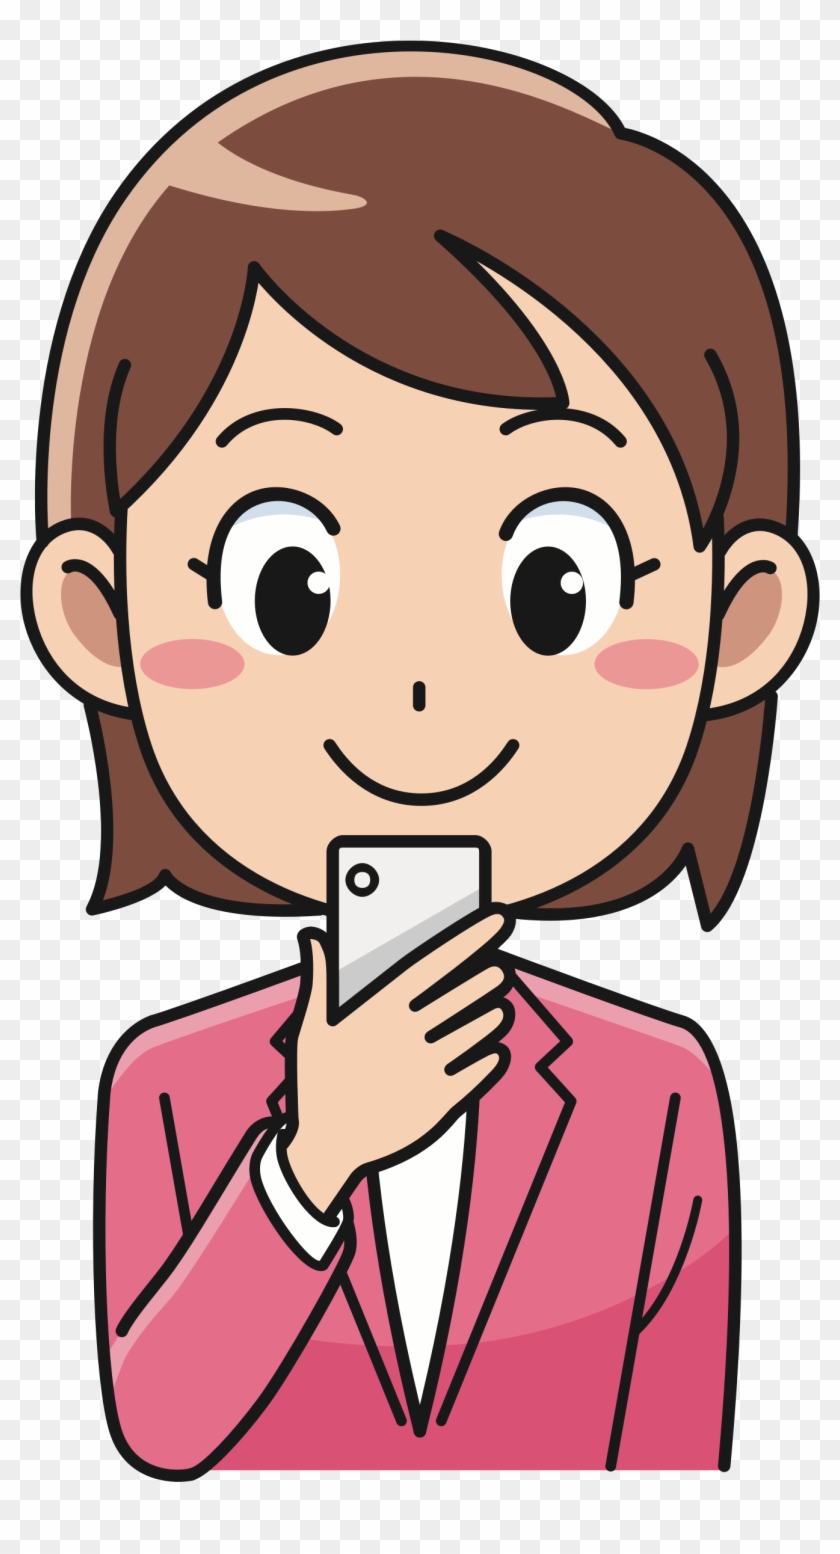 Woman With Smartphone - Man And Woman Cartoon Png #1102231